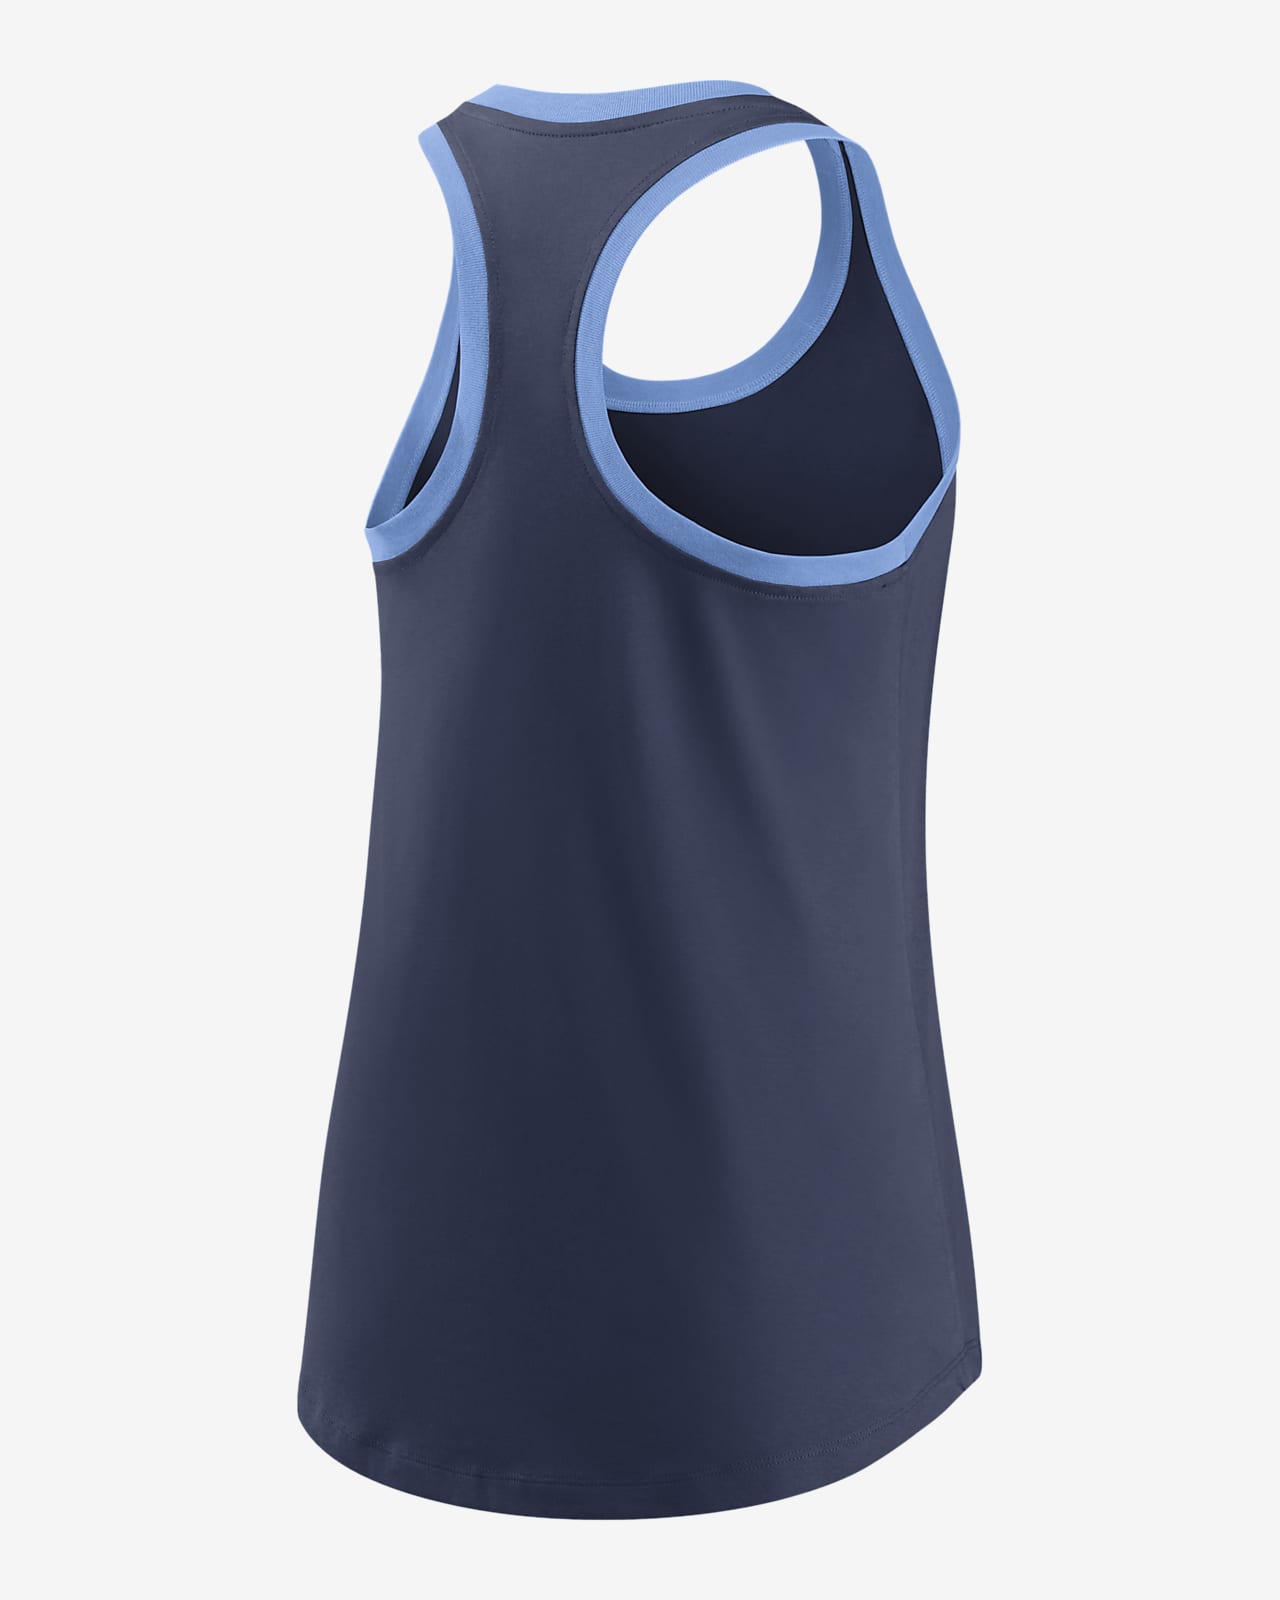 Nike City Connect (MLB Chicago Cubs) Women's Racerback Tank Top.